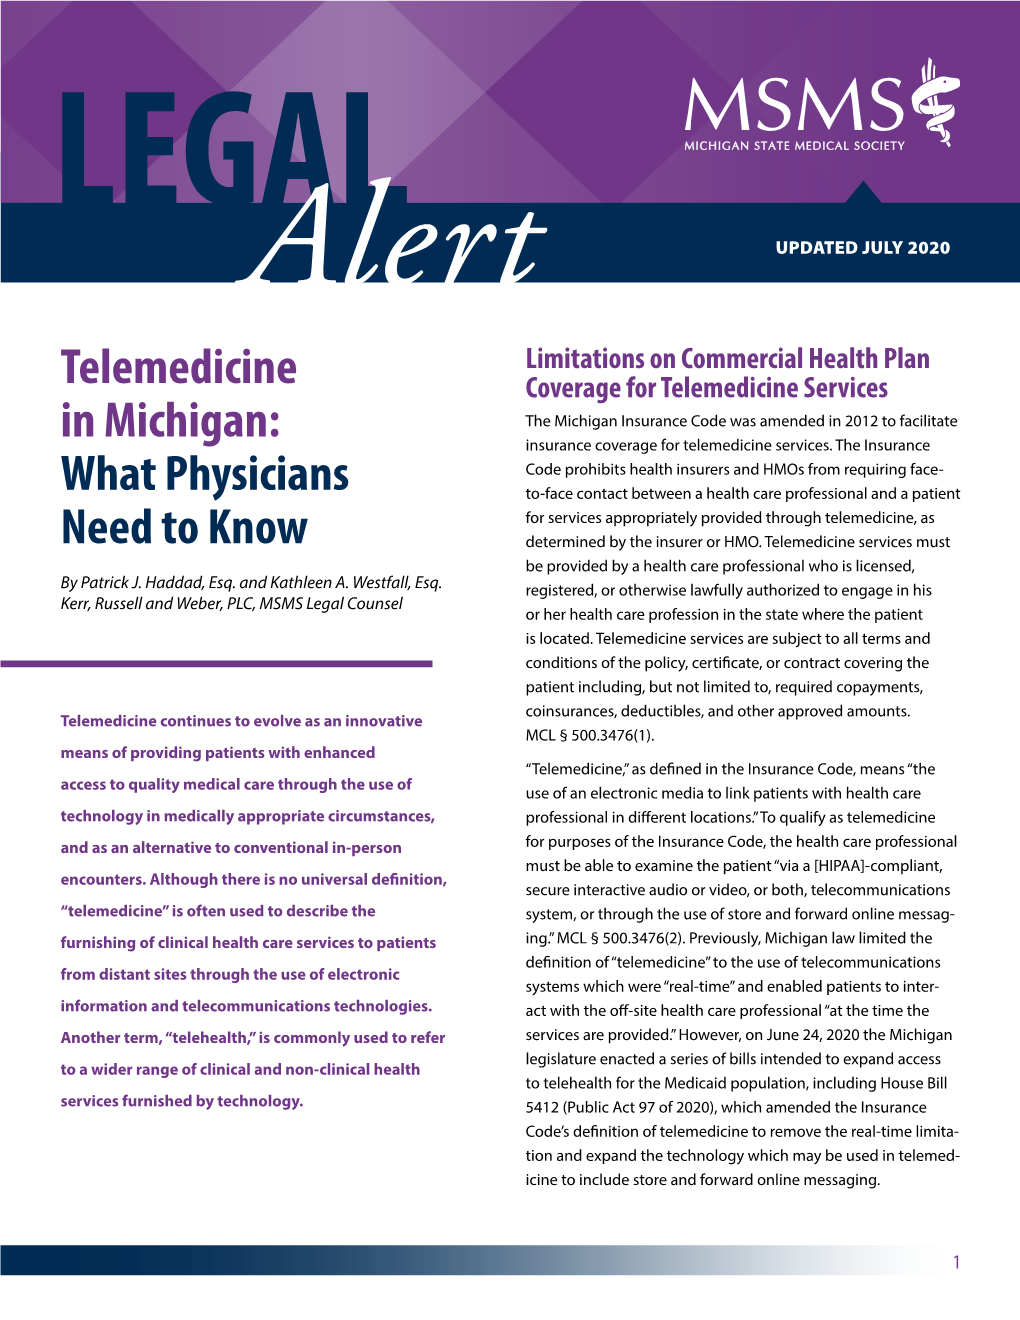 Telemedicine in Michigan: What Physicians Need to Know